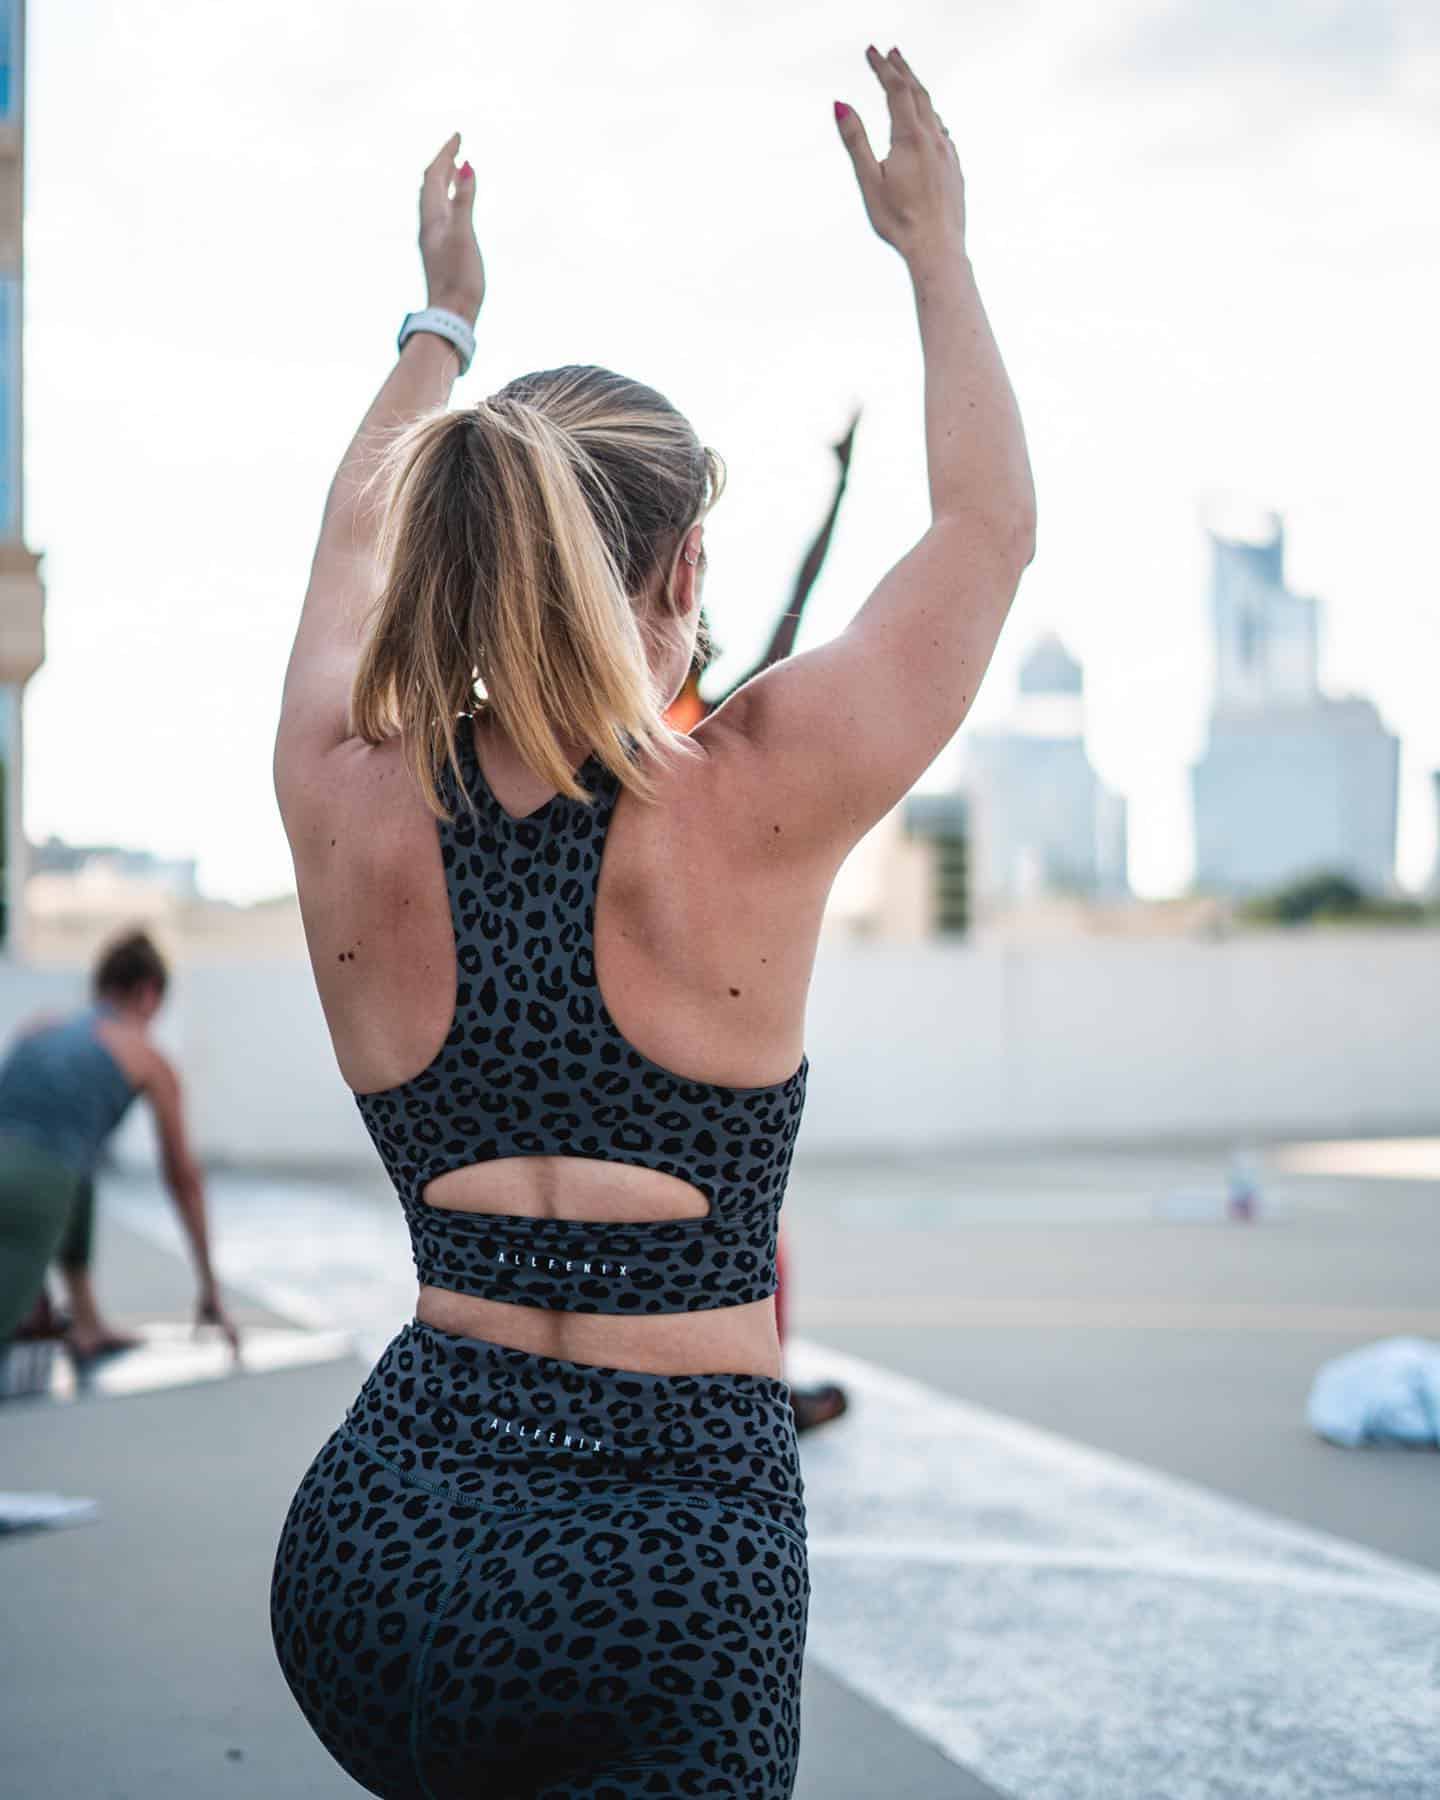 Raise your hand if you're coming to Met Sweat tomorrow on the rooftop? ‍♀️ It's Bar Method with @barmethod and @sweatnetcharlotte, so you're not going to want to miss it. Register ahead of time through our website, bring some water and let's get our sweat on.

Can’t make it? Met Sweat happens every Tuesday, and upcoming classes include solid core, rooftop Pilates and more. All the info is on our site!